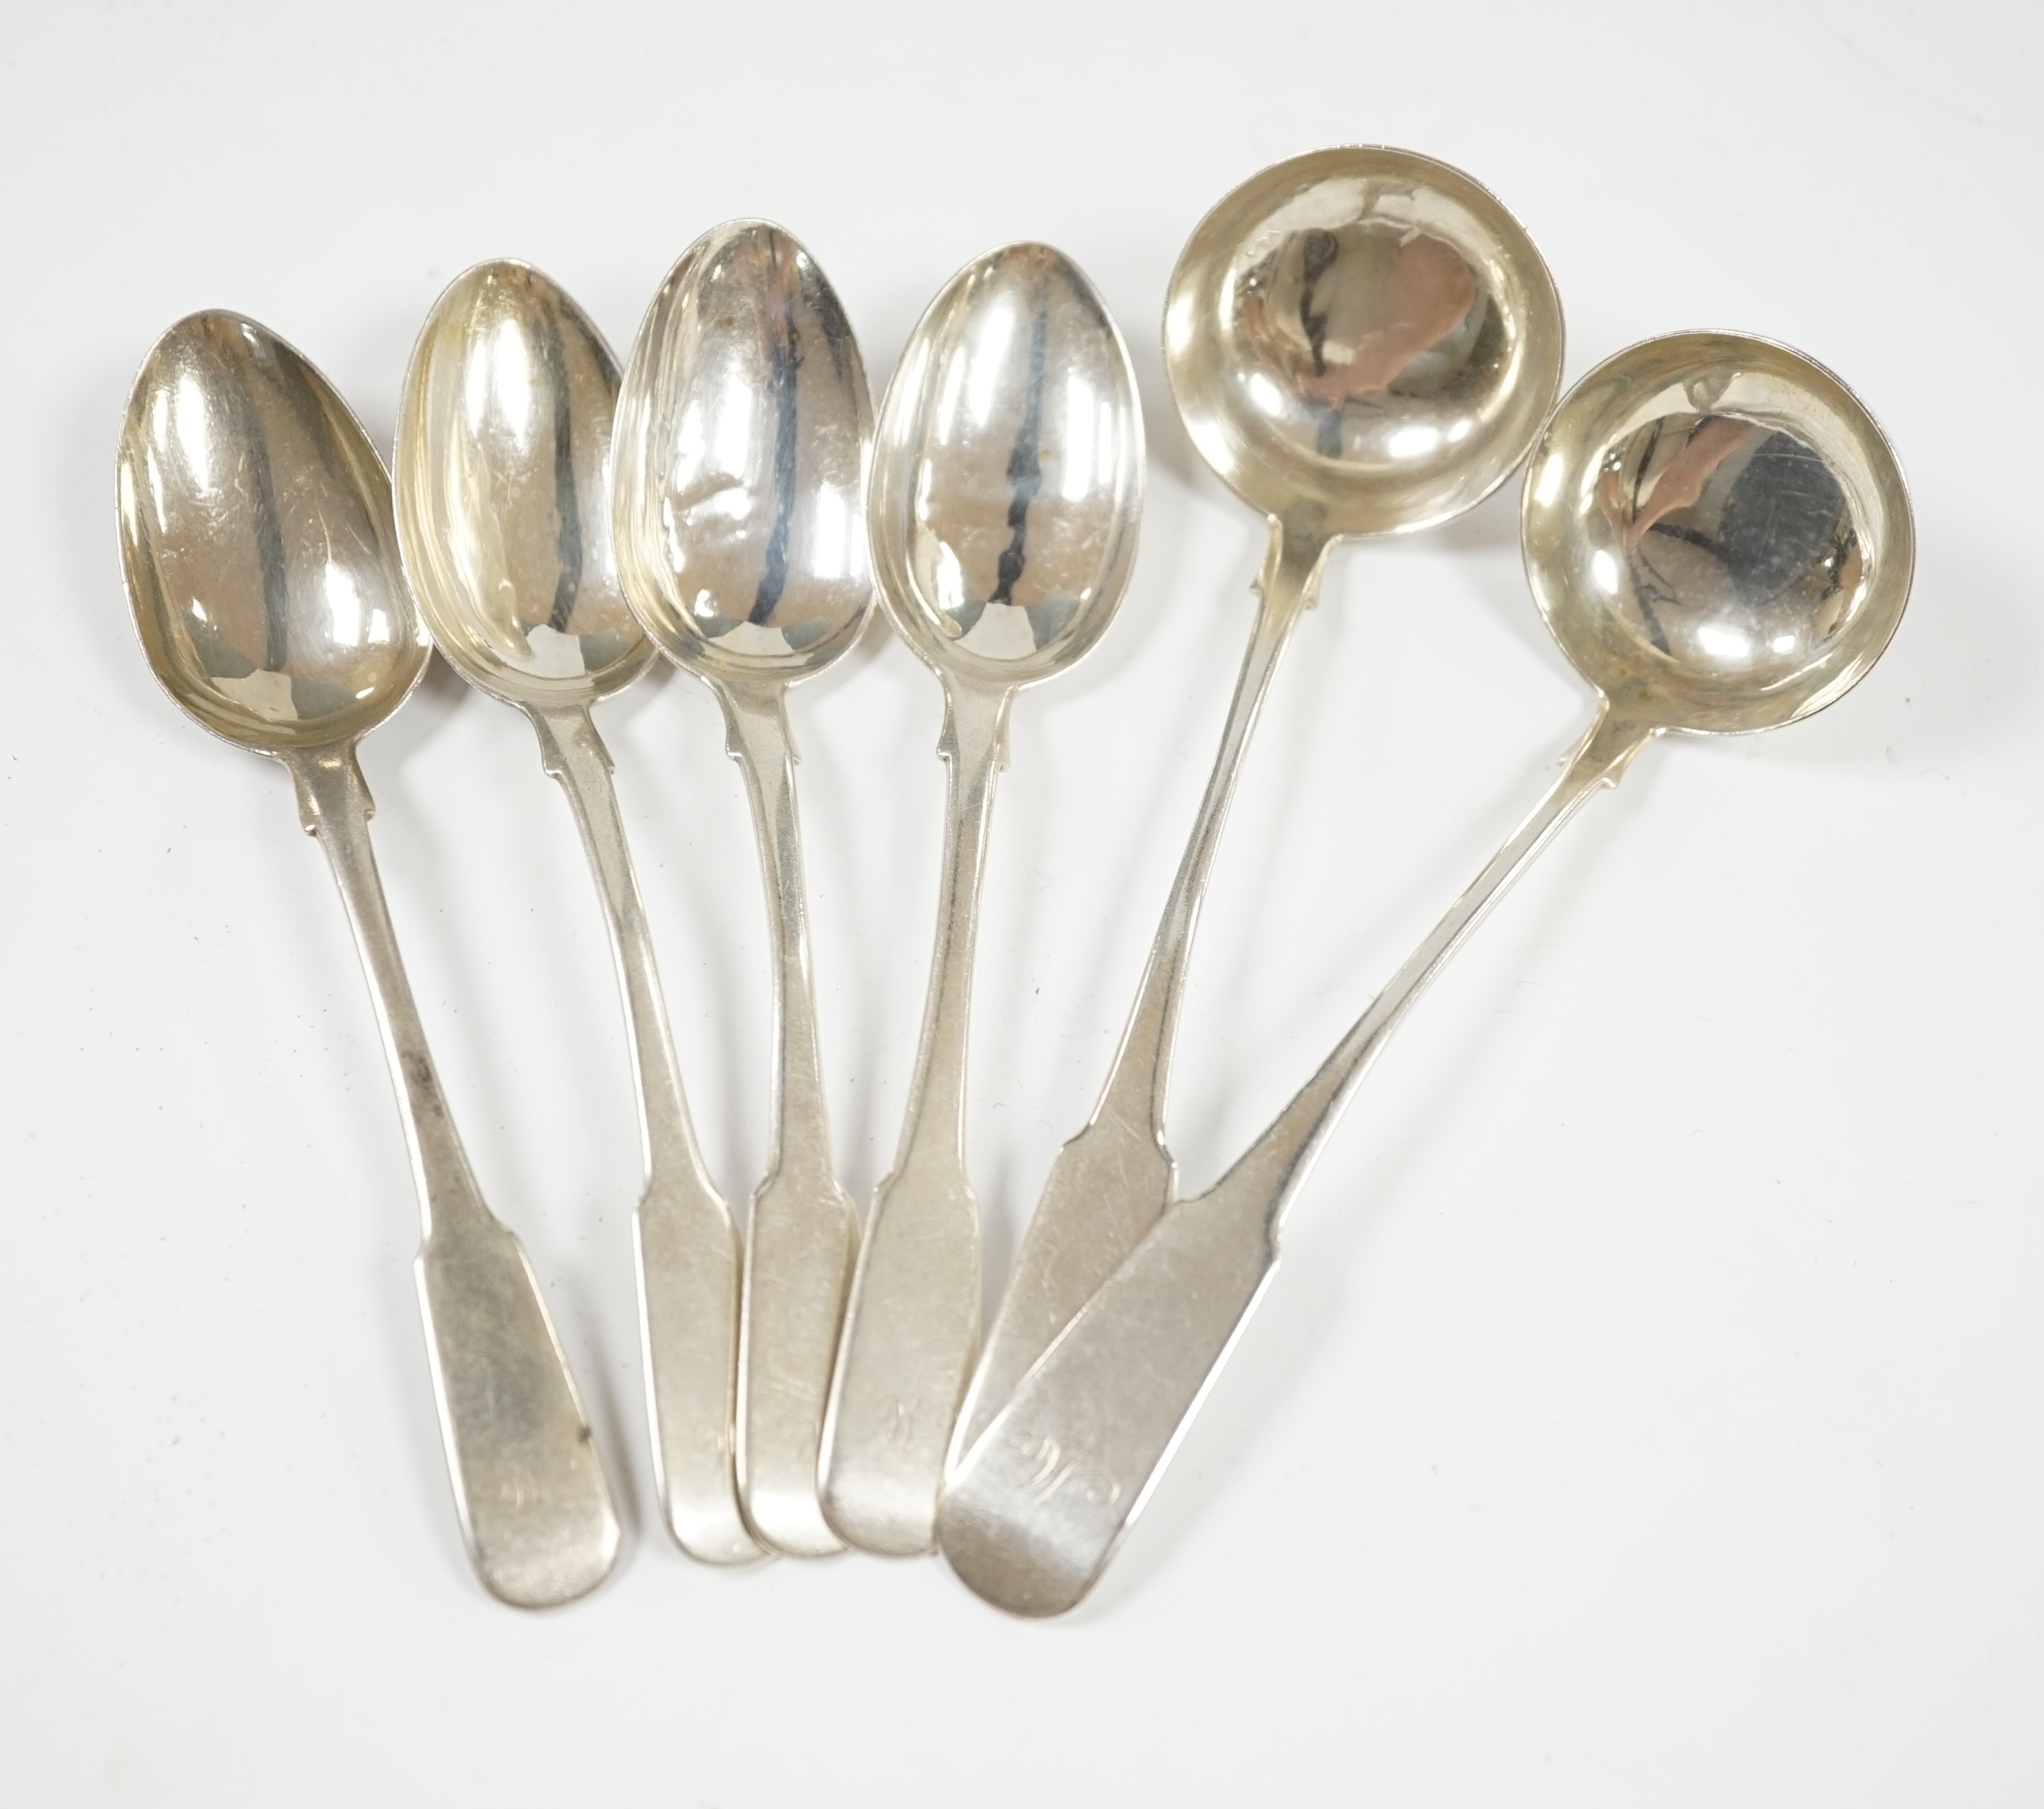 A pair of Victorian Scottish provincial sauce ladles and a set of four teaspoons, Richard Kray II, Perth, circa 1820, 4.3oz. Condition - fair